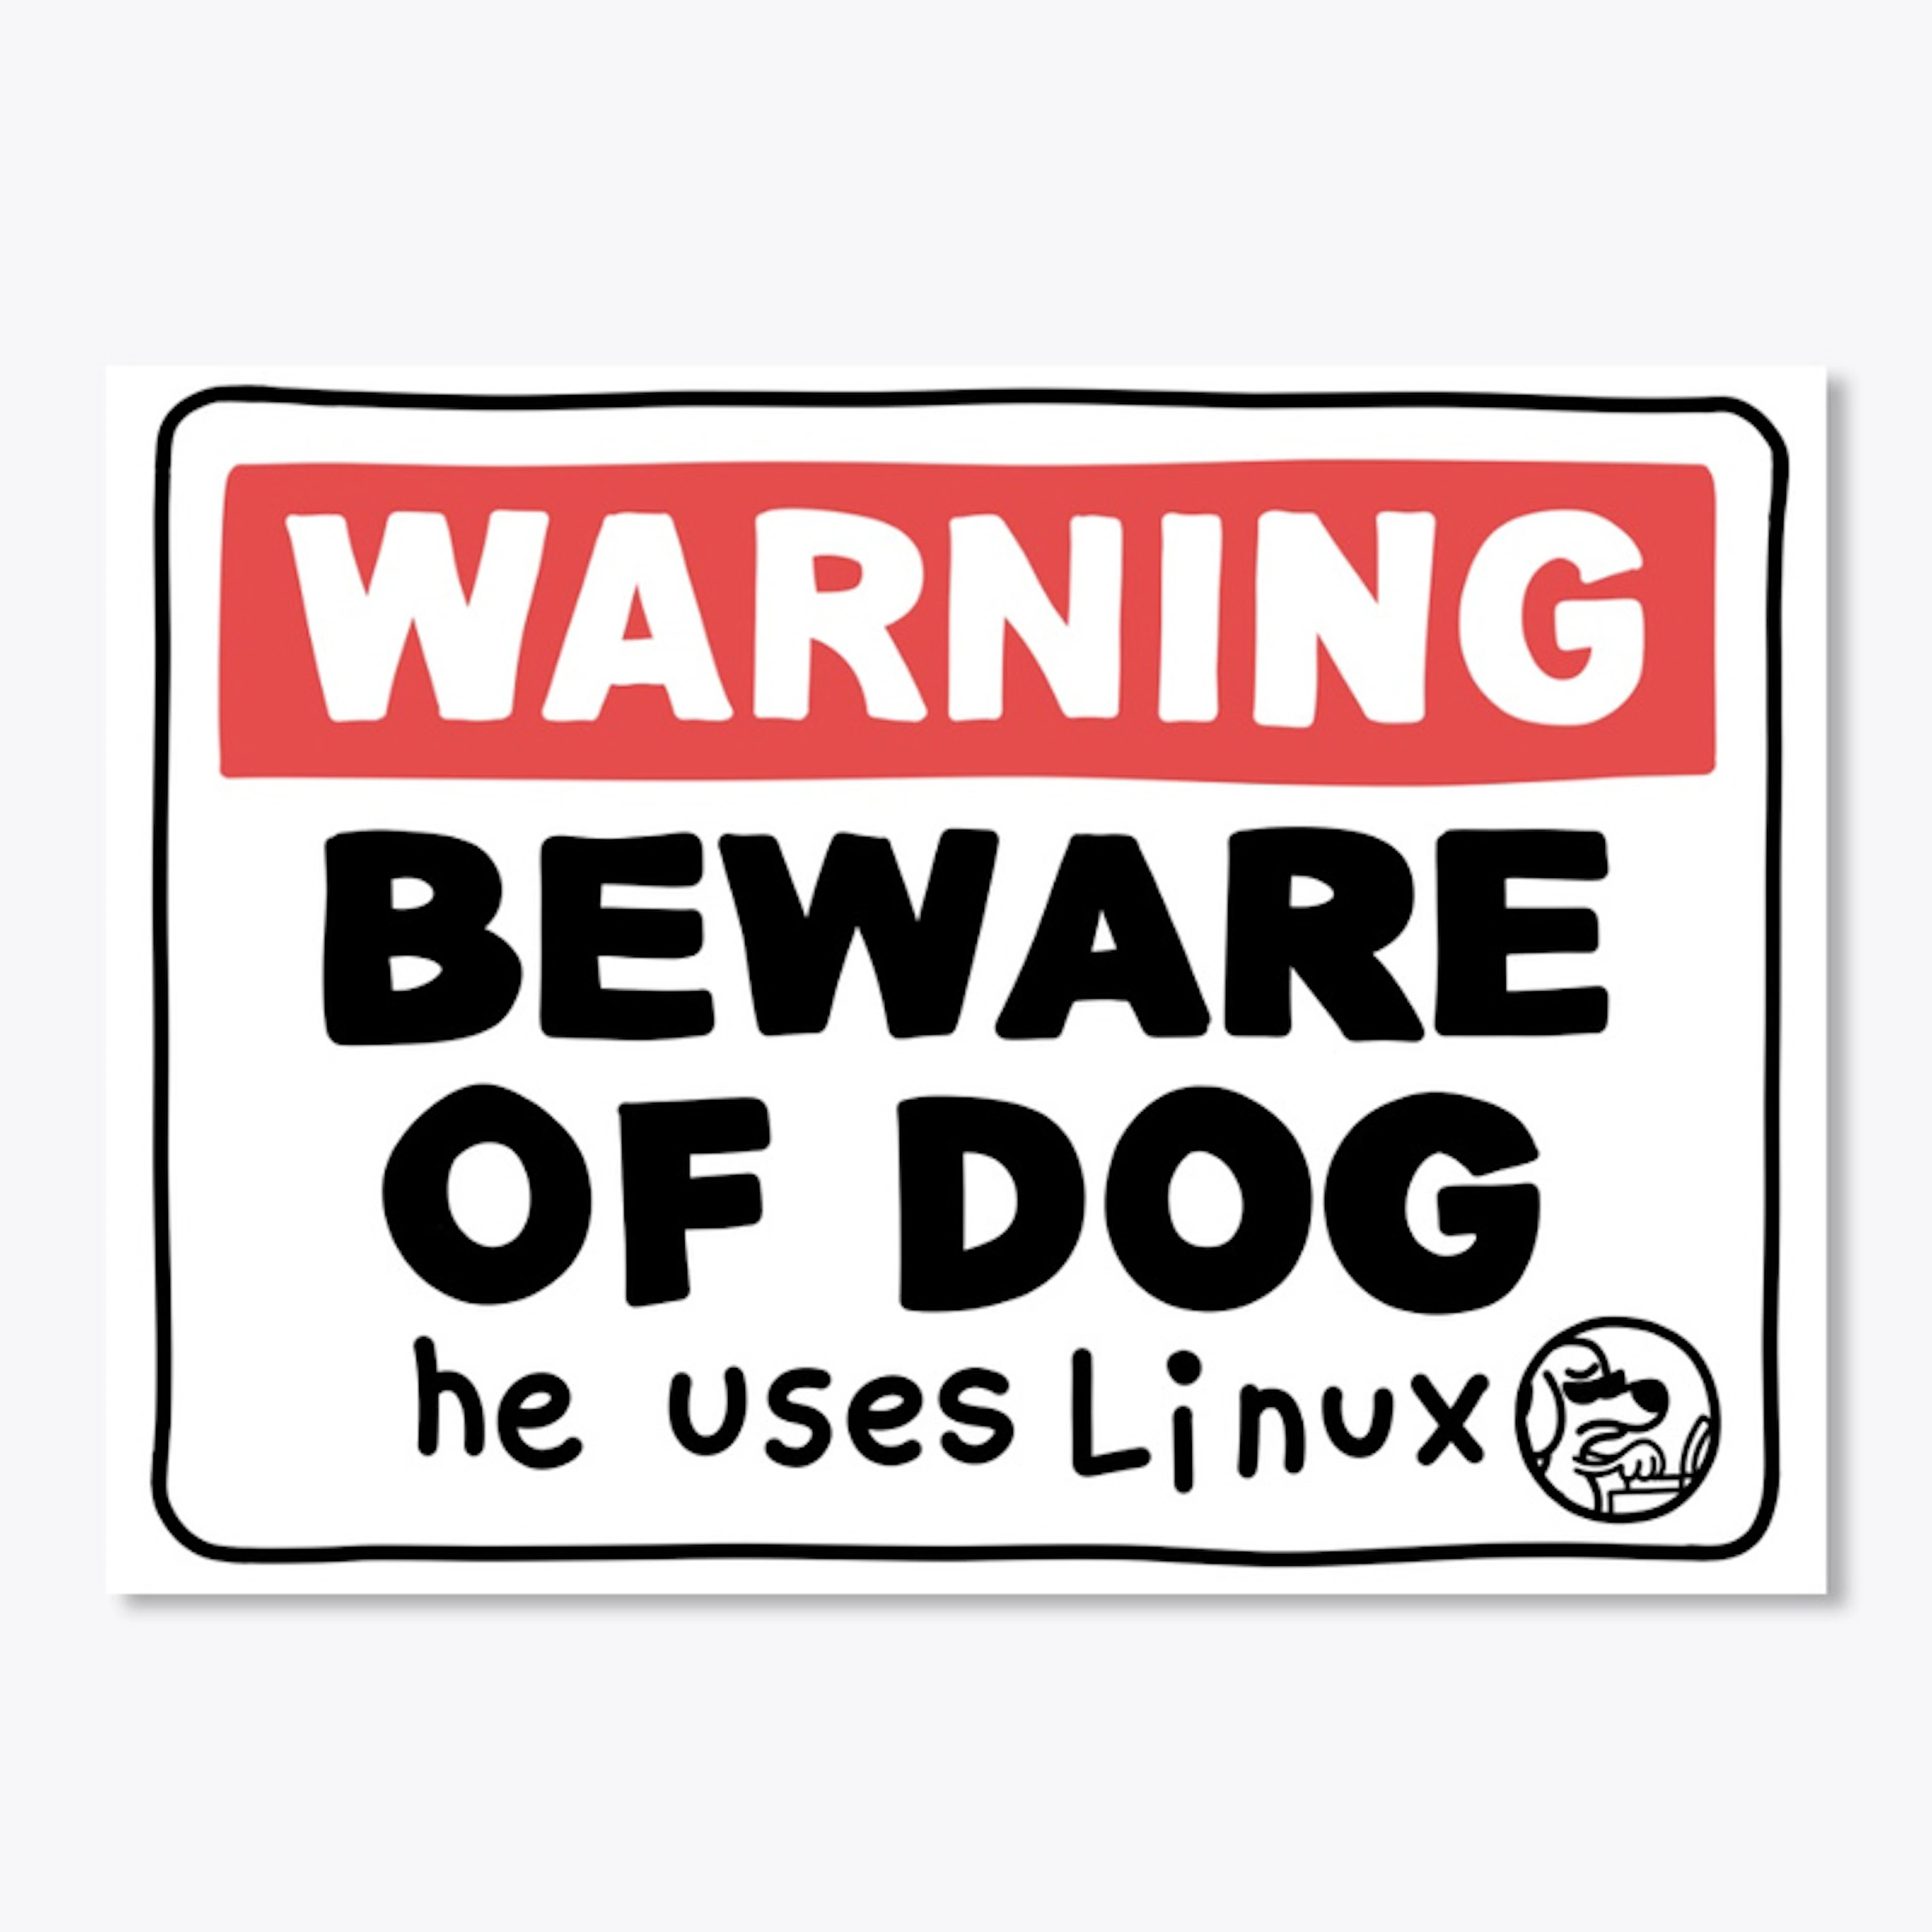 Beware of Dog: he uses Linux